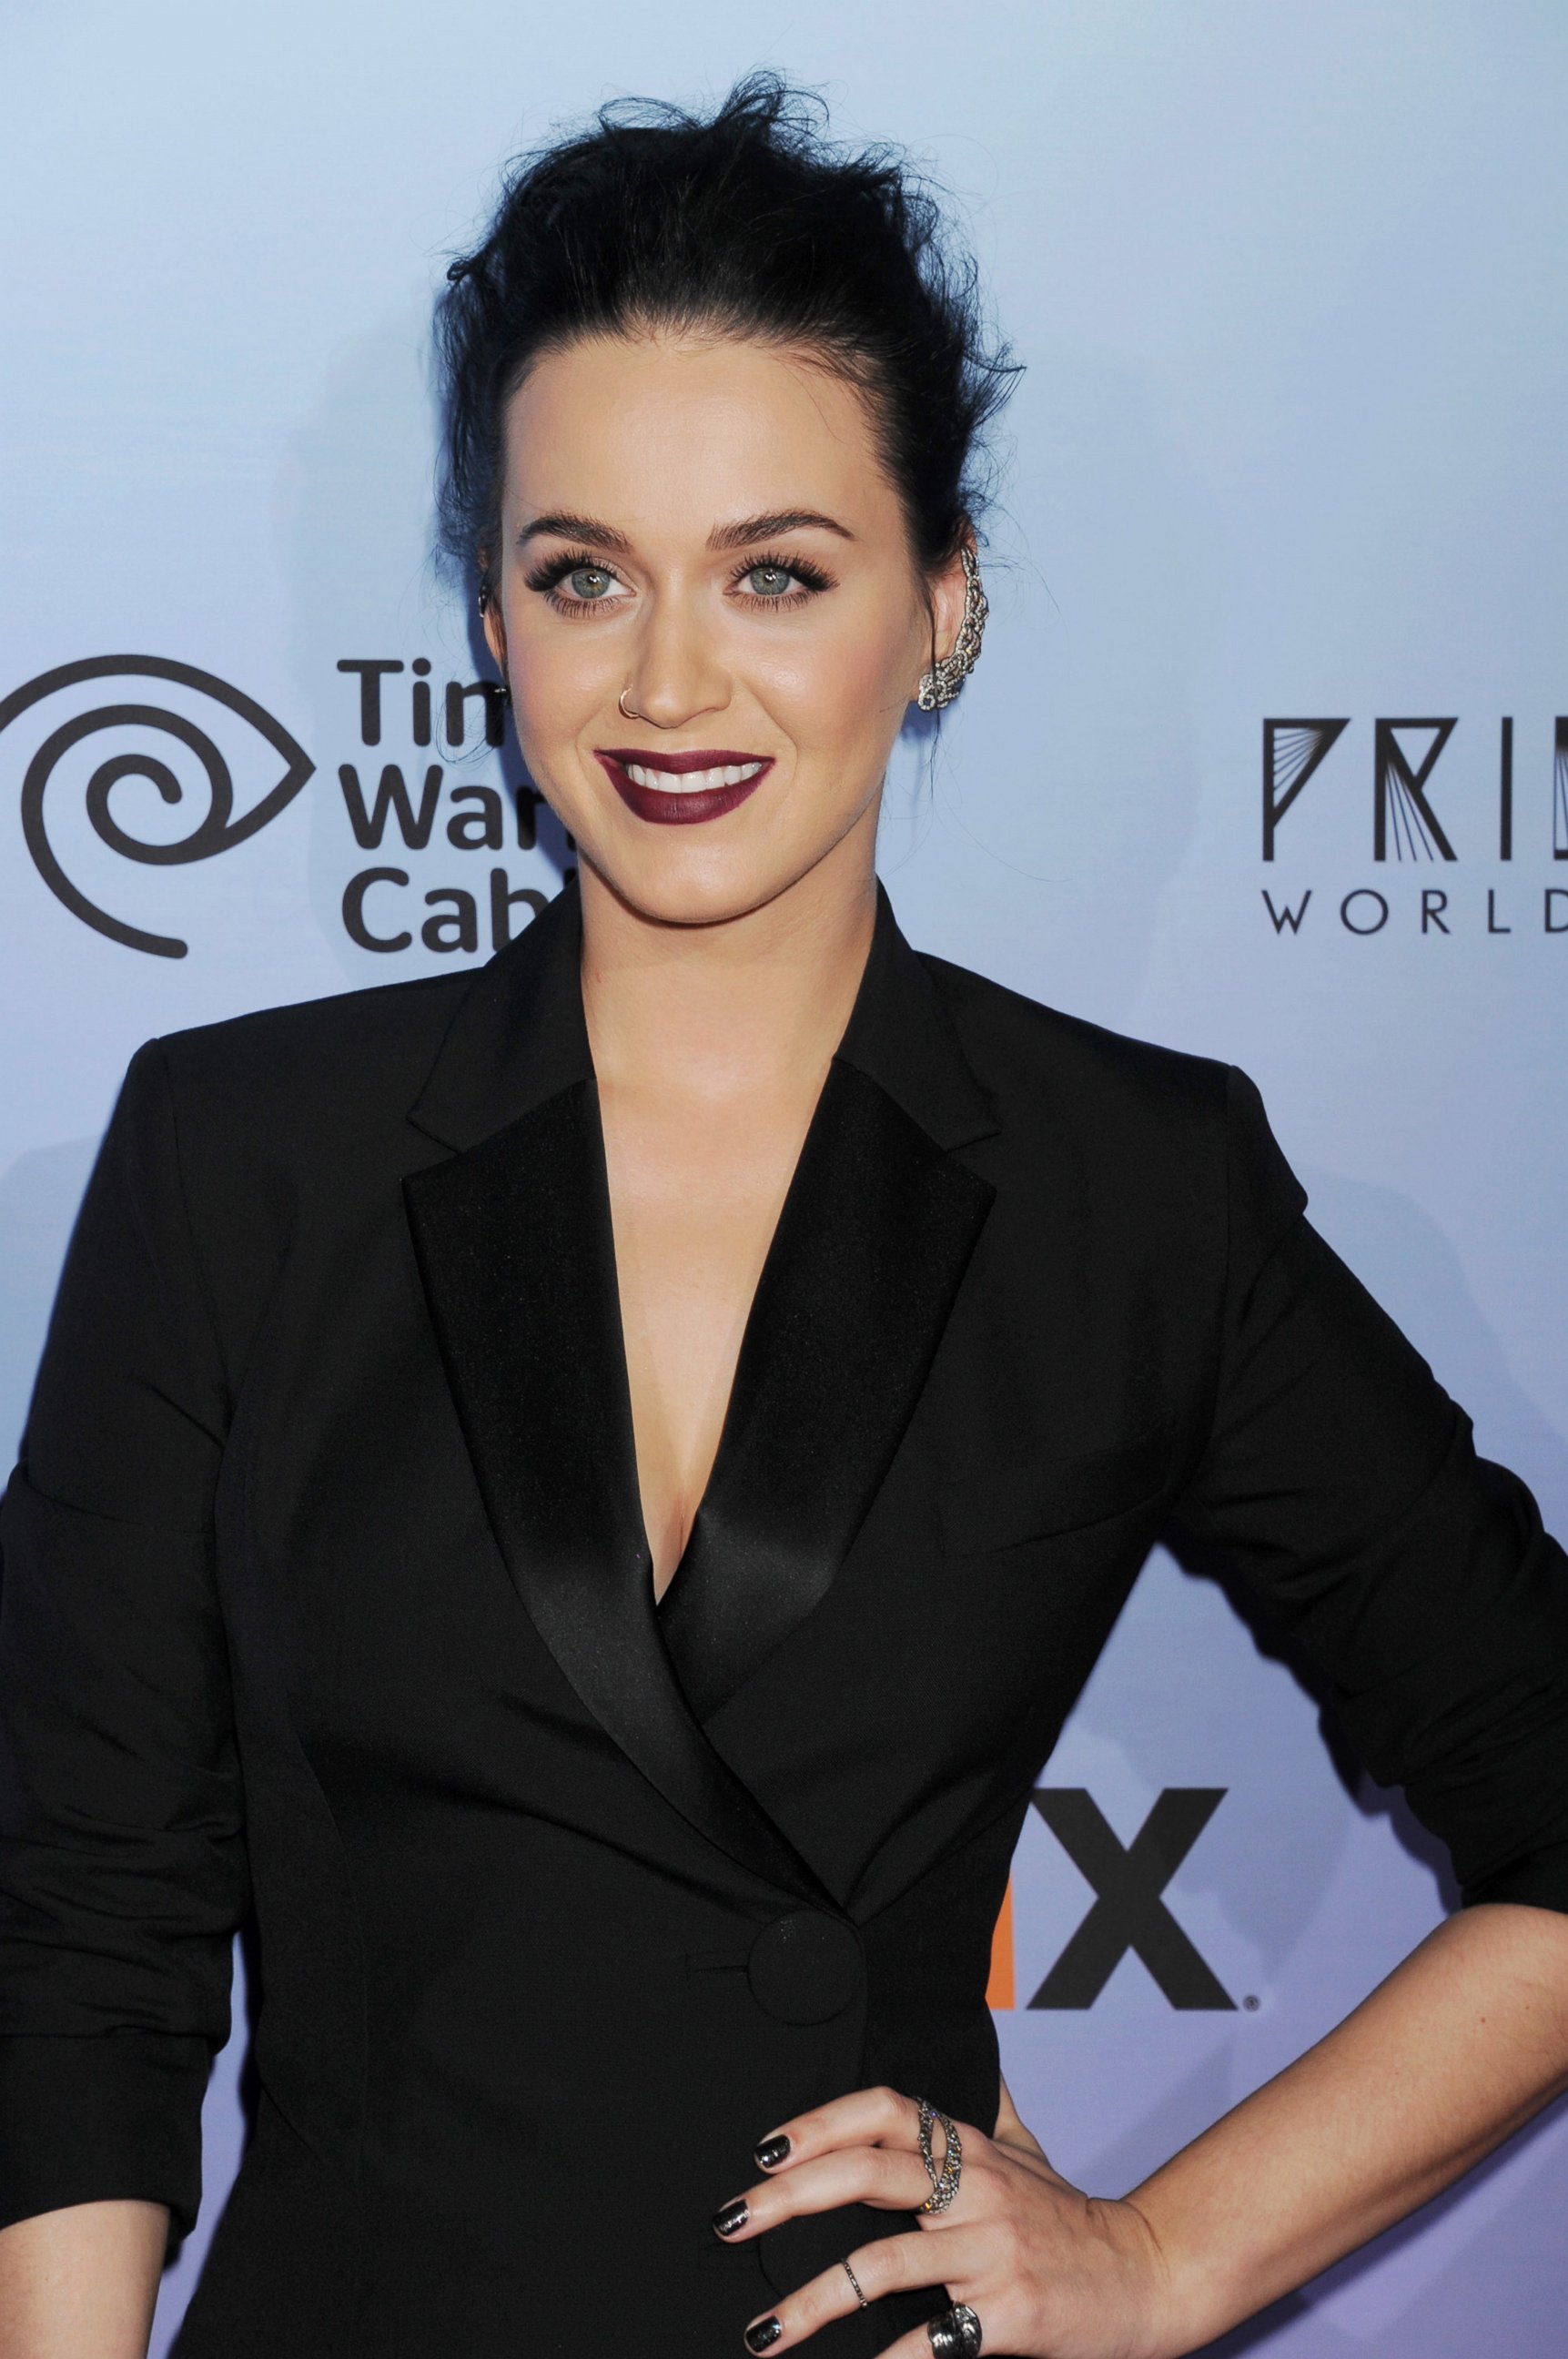 PHOTO: Katy Perry is pictured on March 26, 2015 in Los Angeles, Calif.